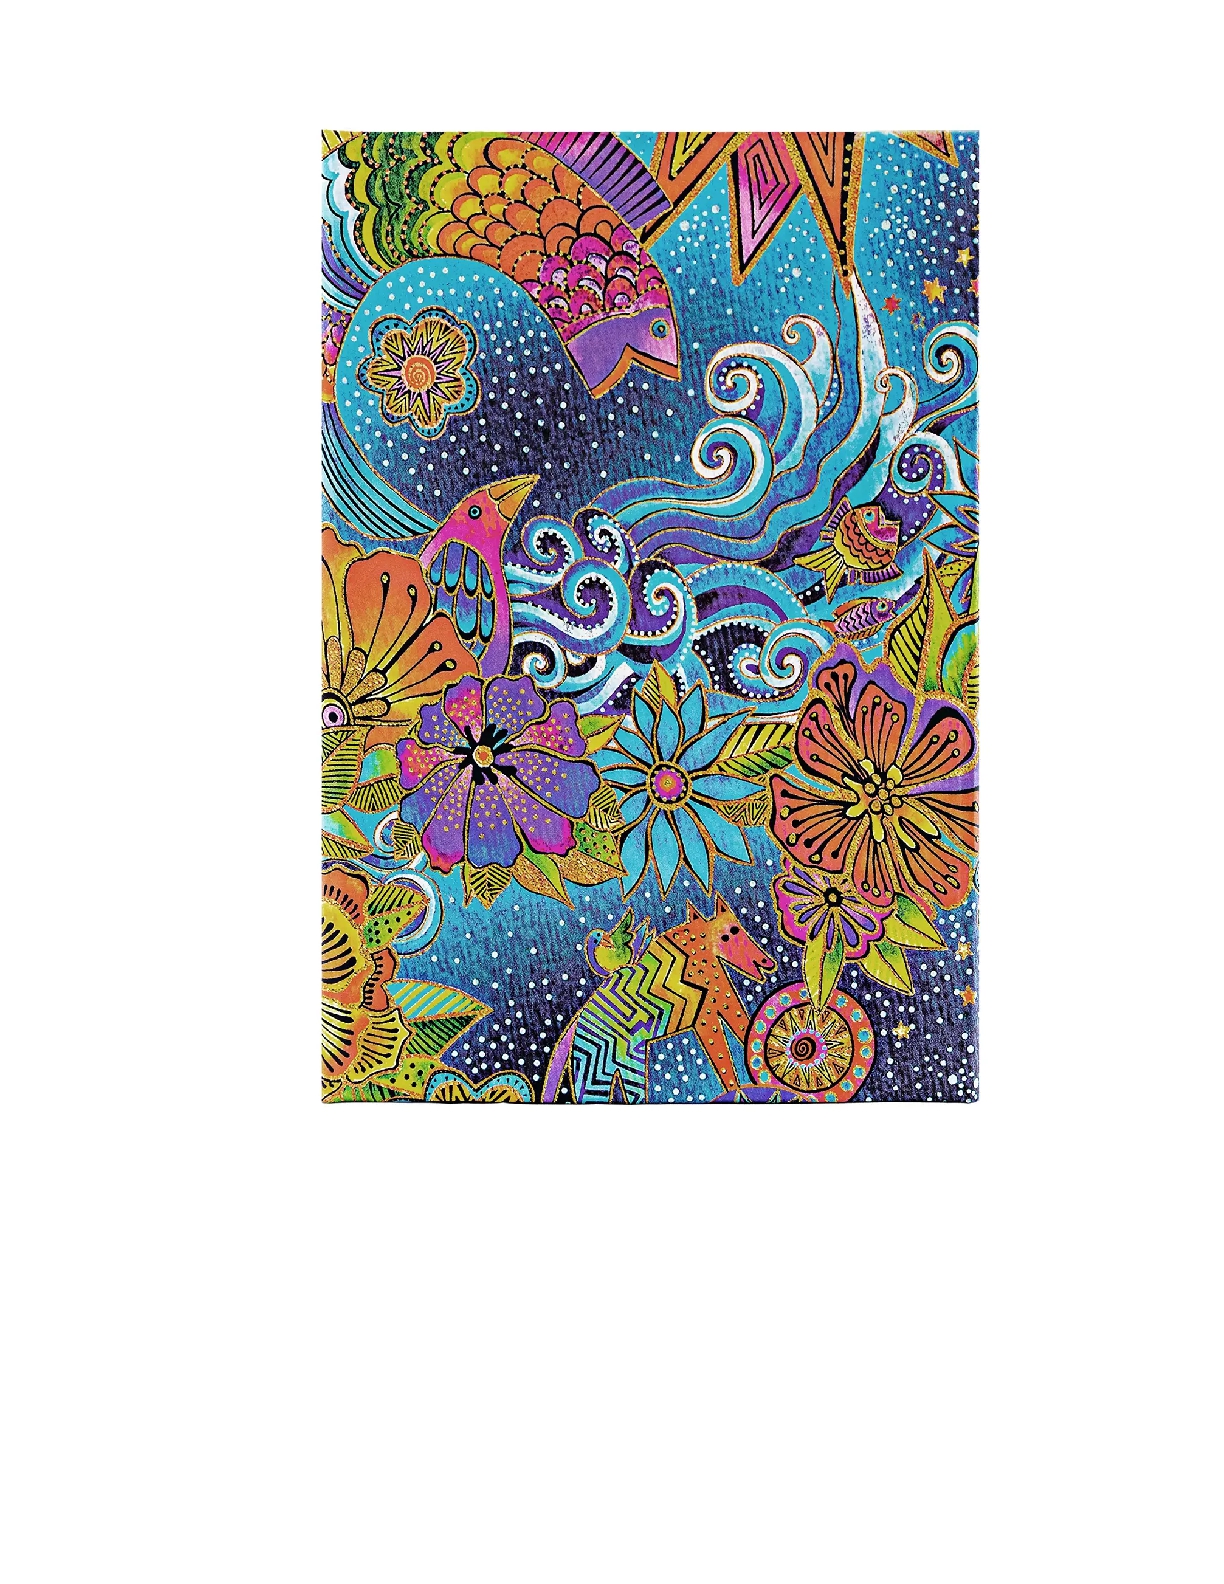 Celestial Magic, Whimsical Creations, Hardcover Journals, Mini, Lined, Wrap, 176 Pg, 85 GSM